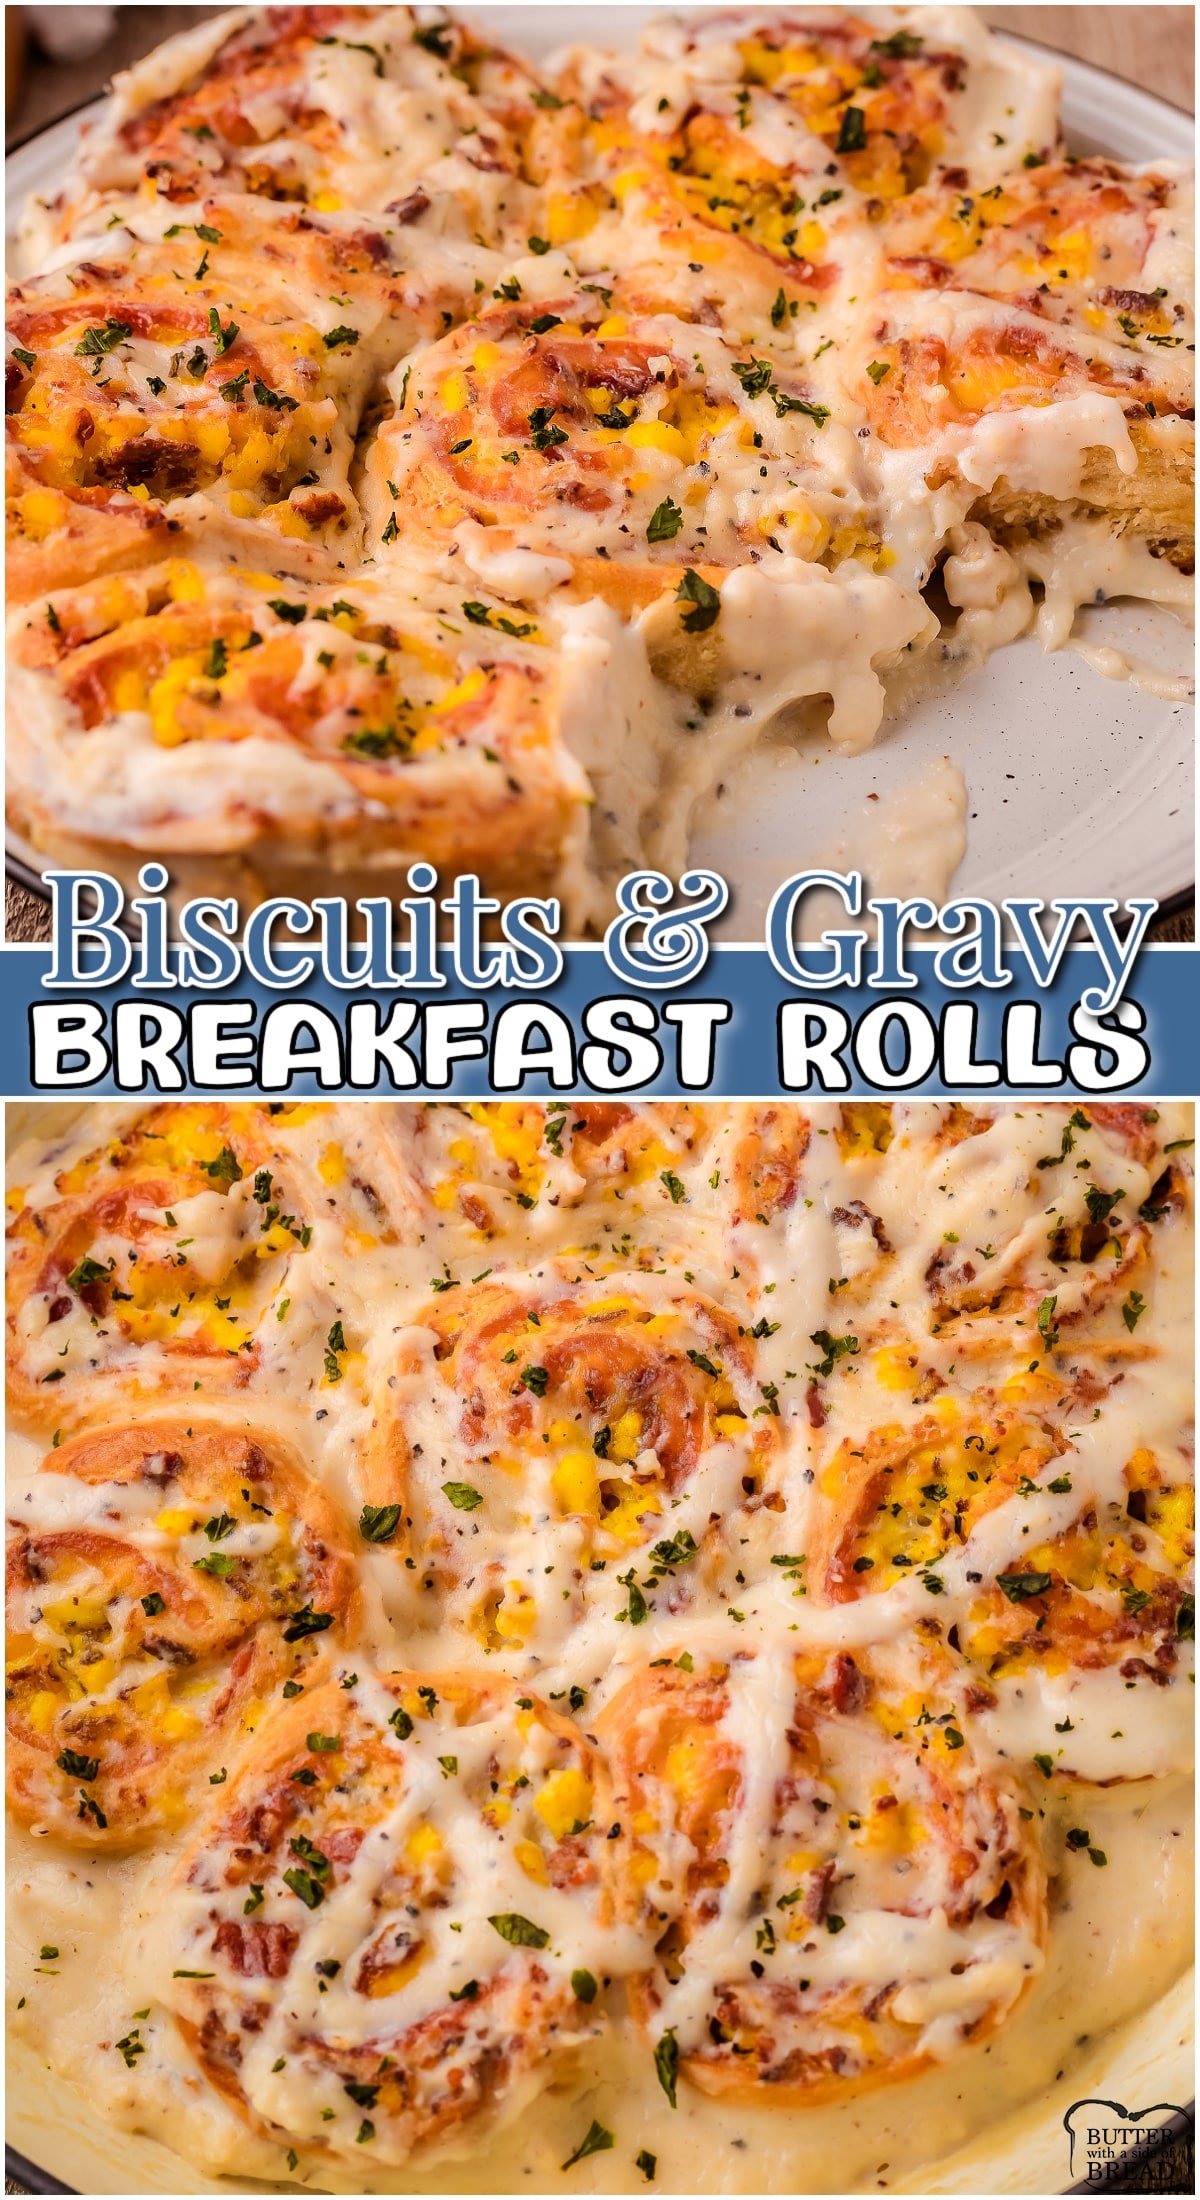 Biscuit & Gravy Breakfast Rolls baked with bacon, eggs and cheese, then topped with a creamy, savory gravy for the ultimate breakfast! 